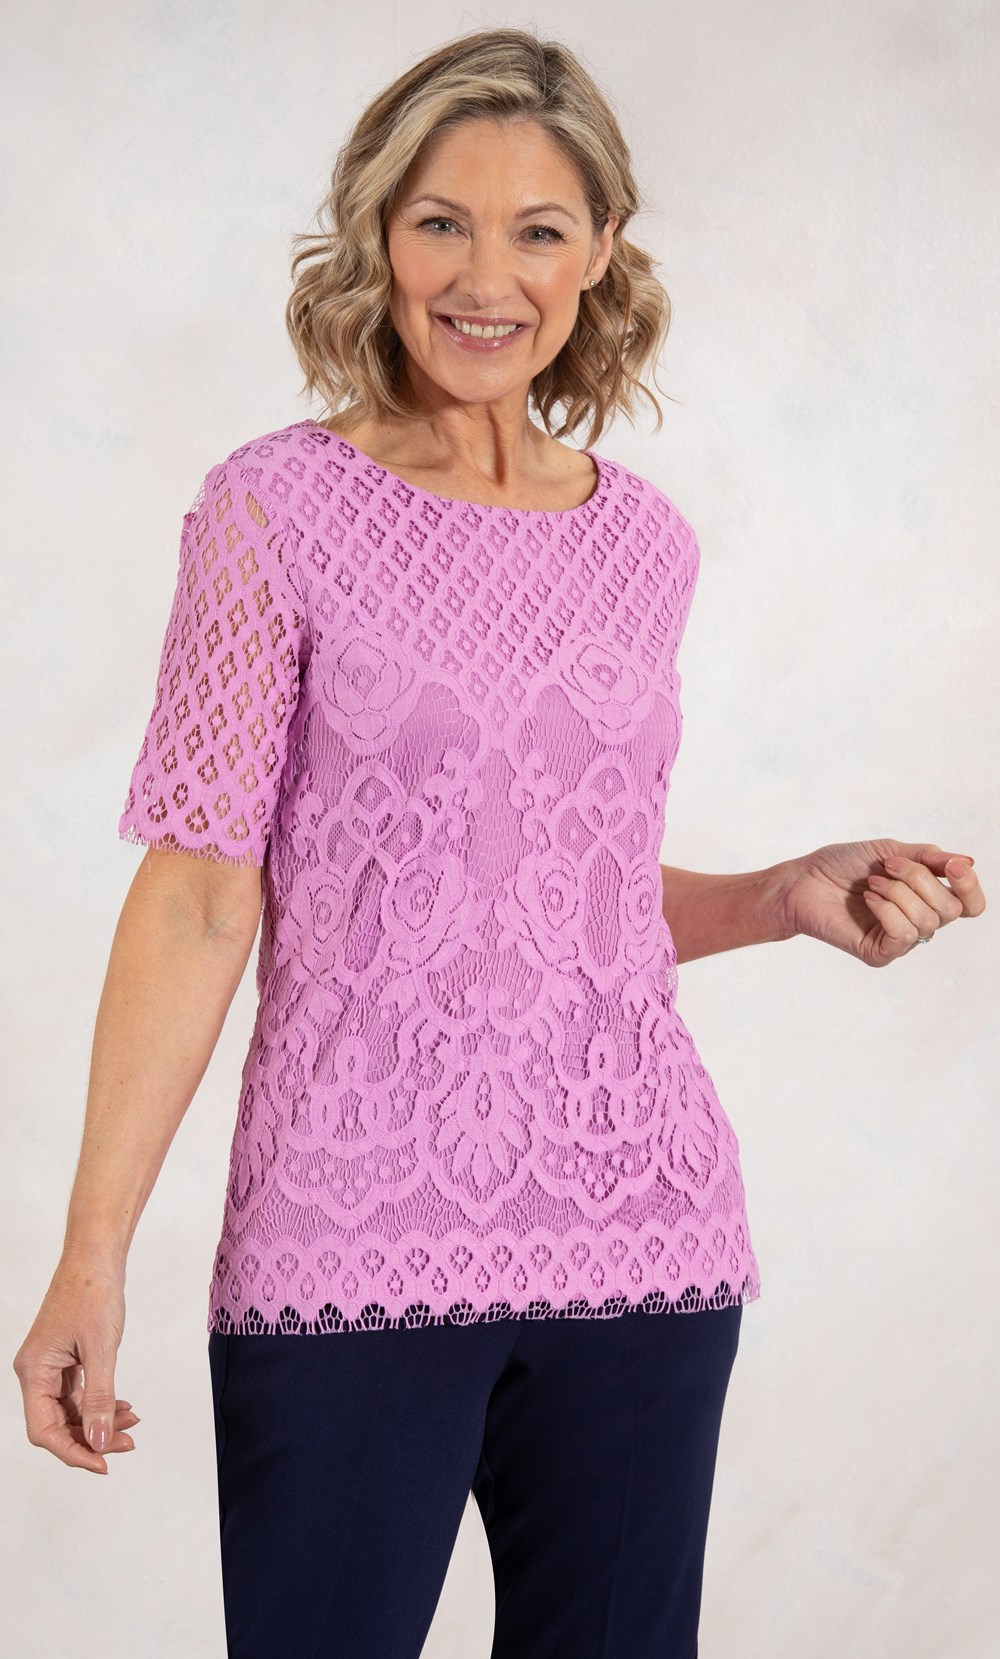 Anna Rose Short Sleeve Lace Top